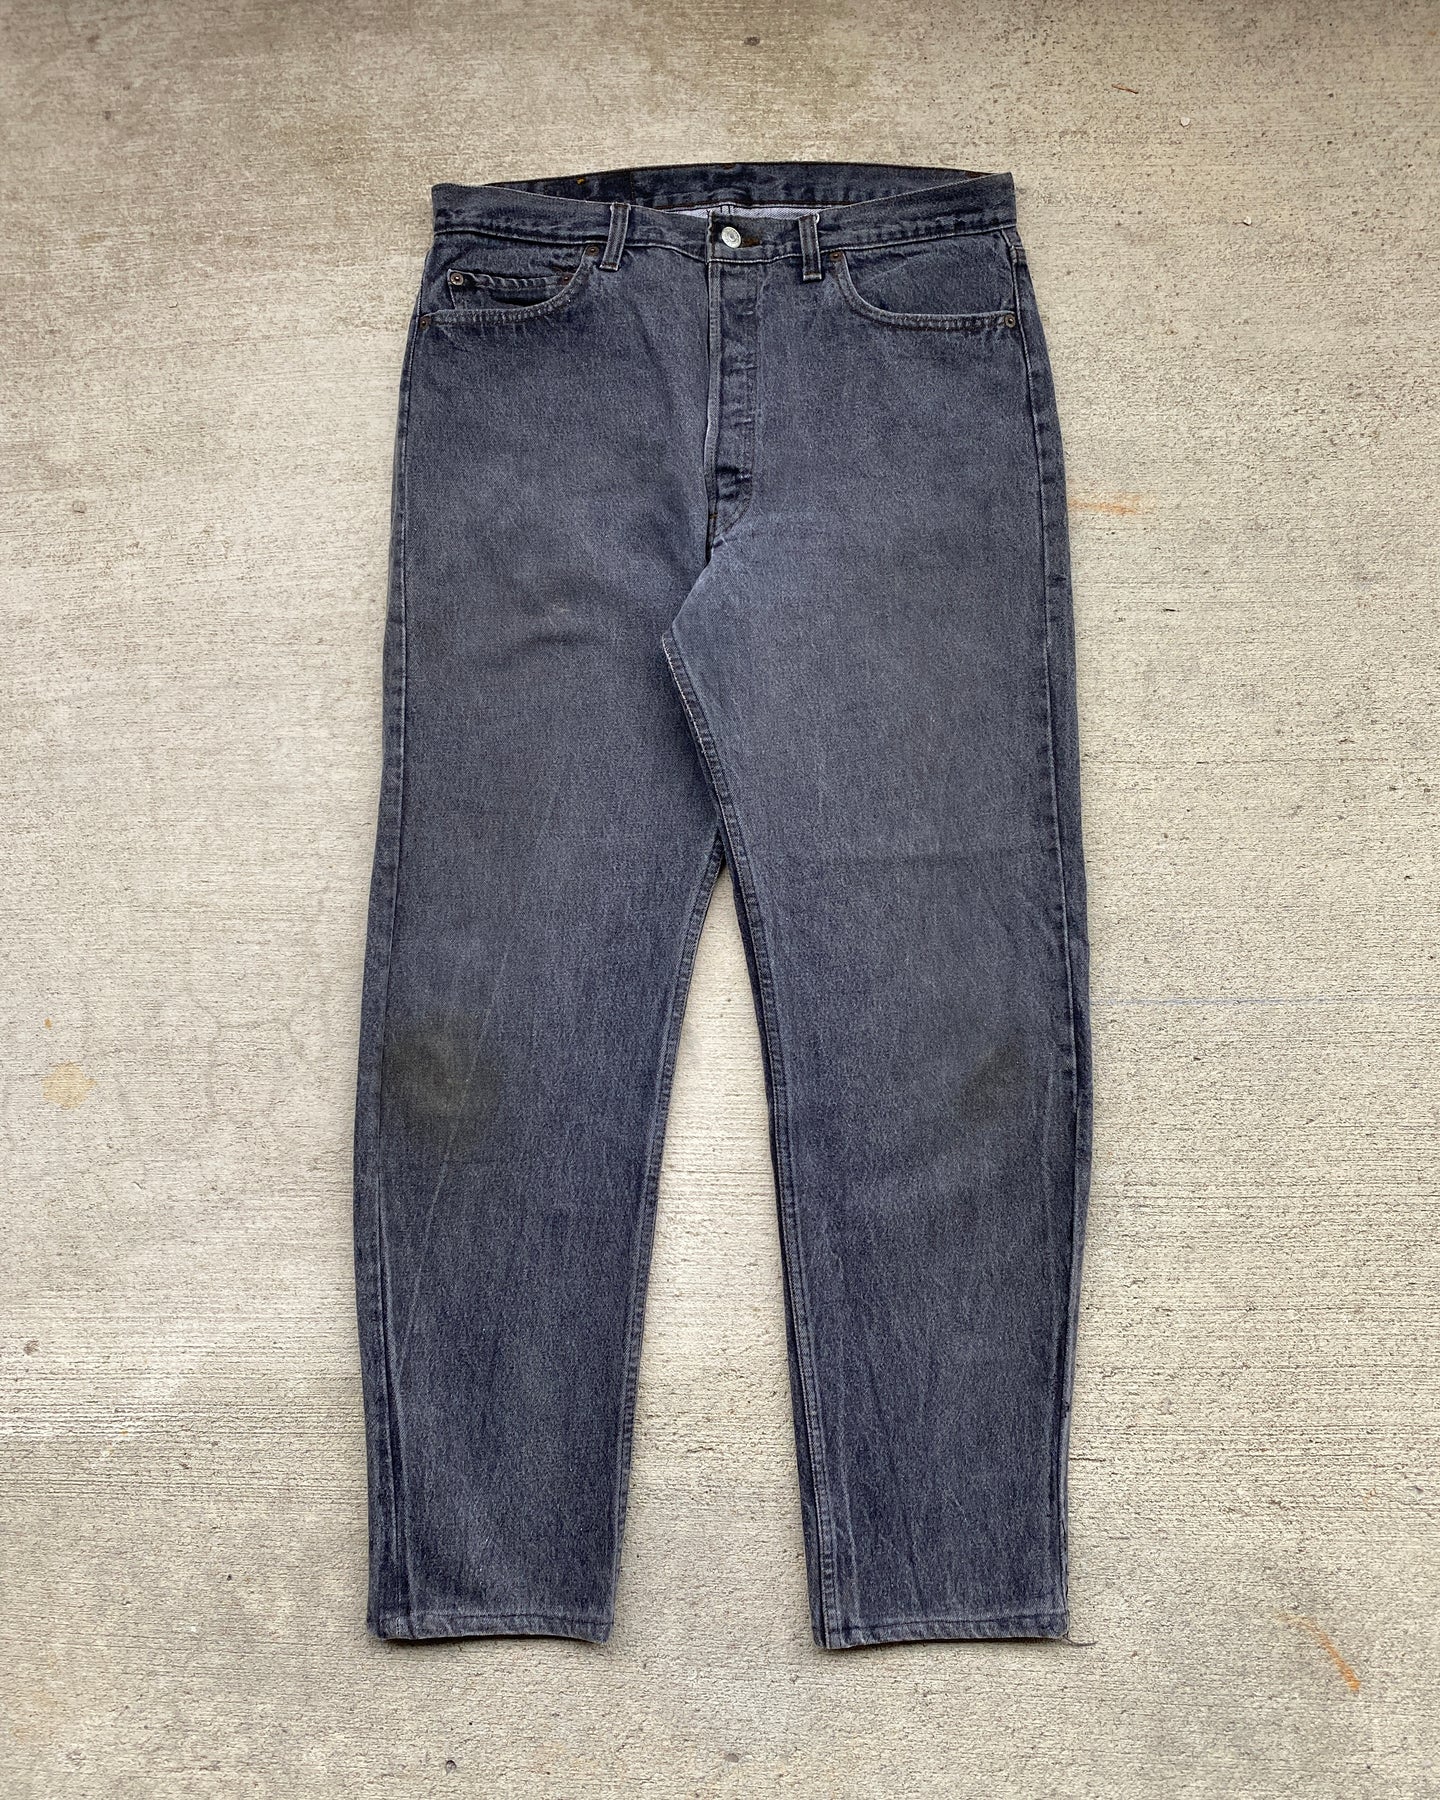 1980s Levi's Faded Washed Black 501 - Size 34 x 30